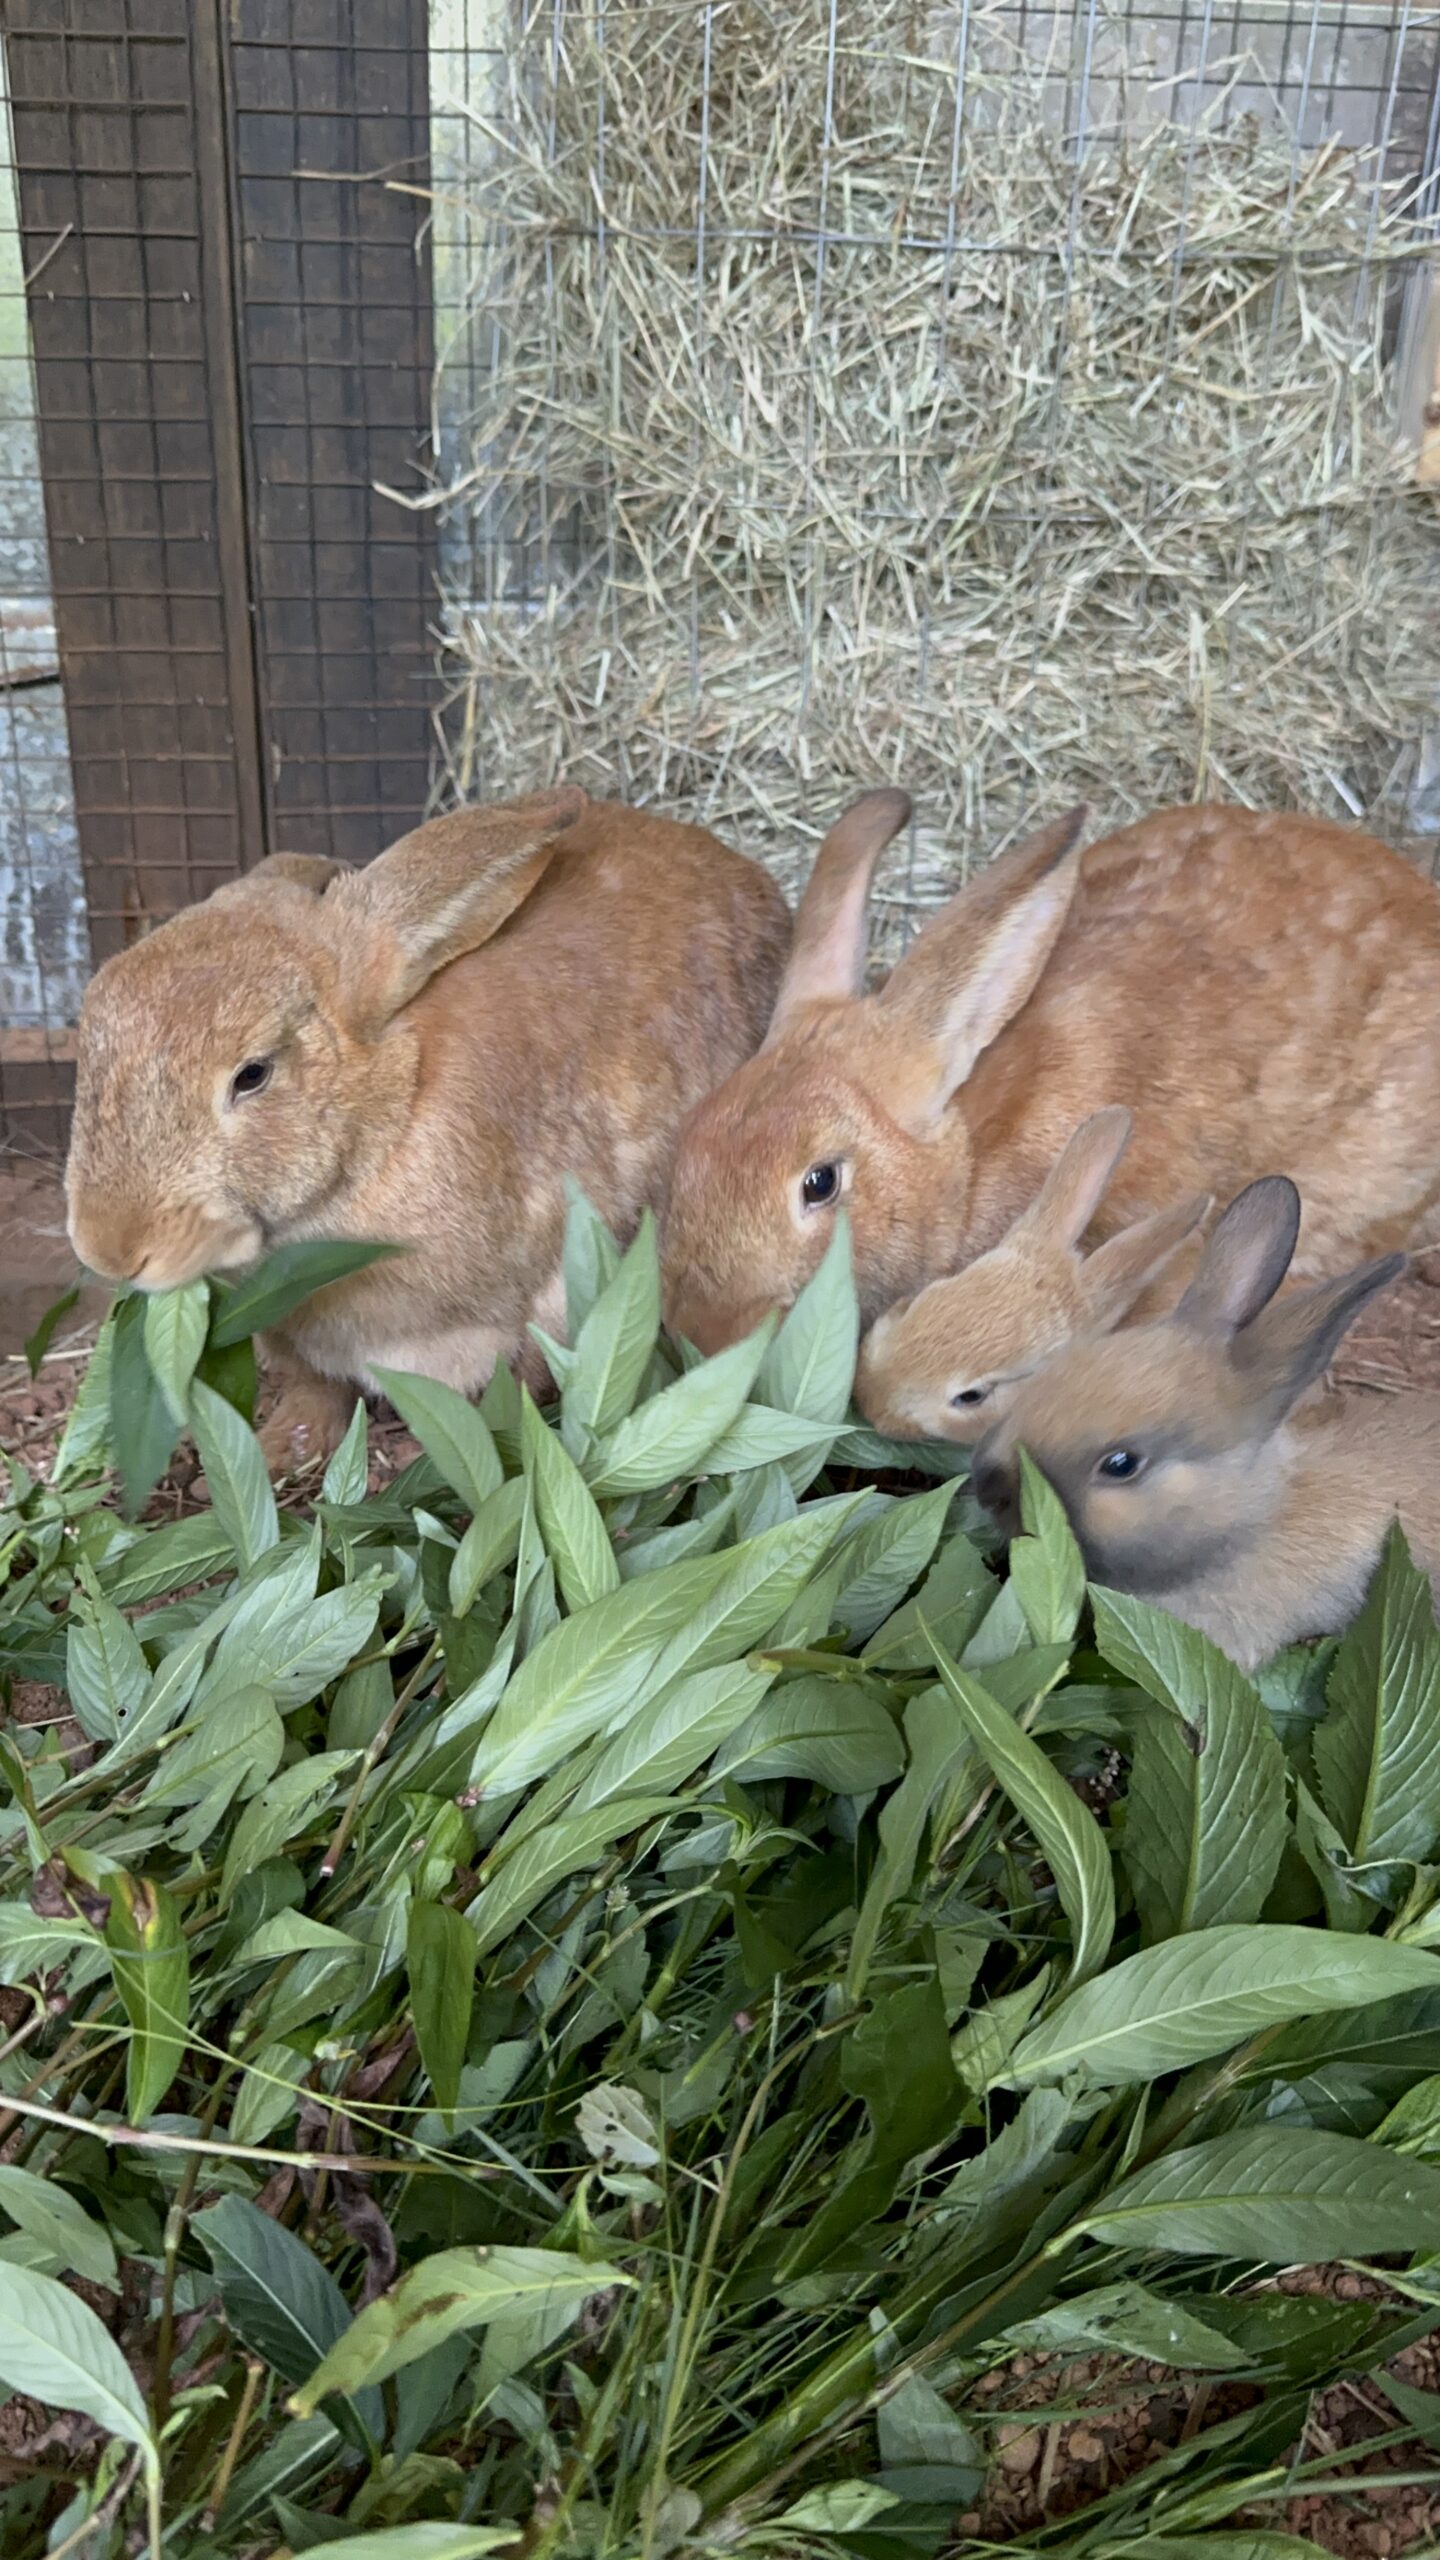 We bring our rabbits fresh greens every morning.